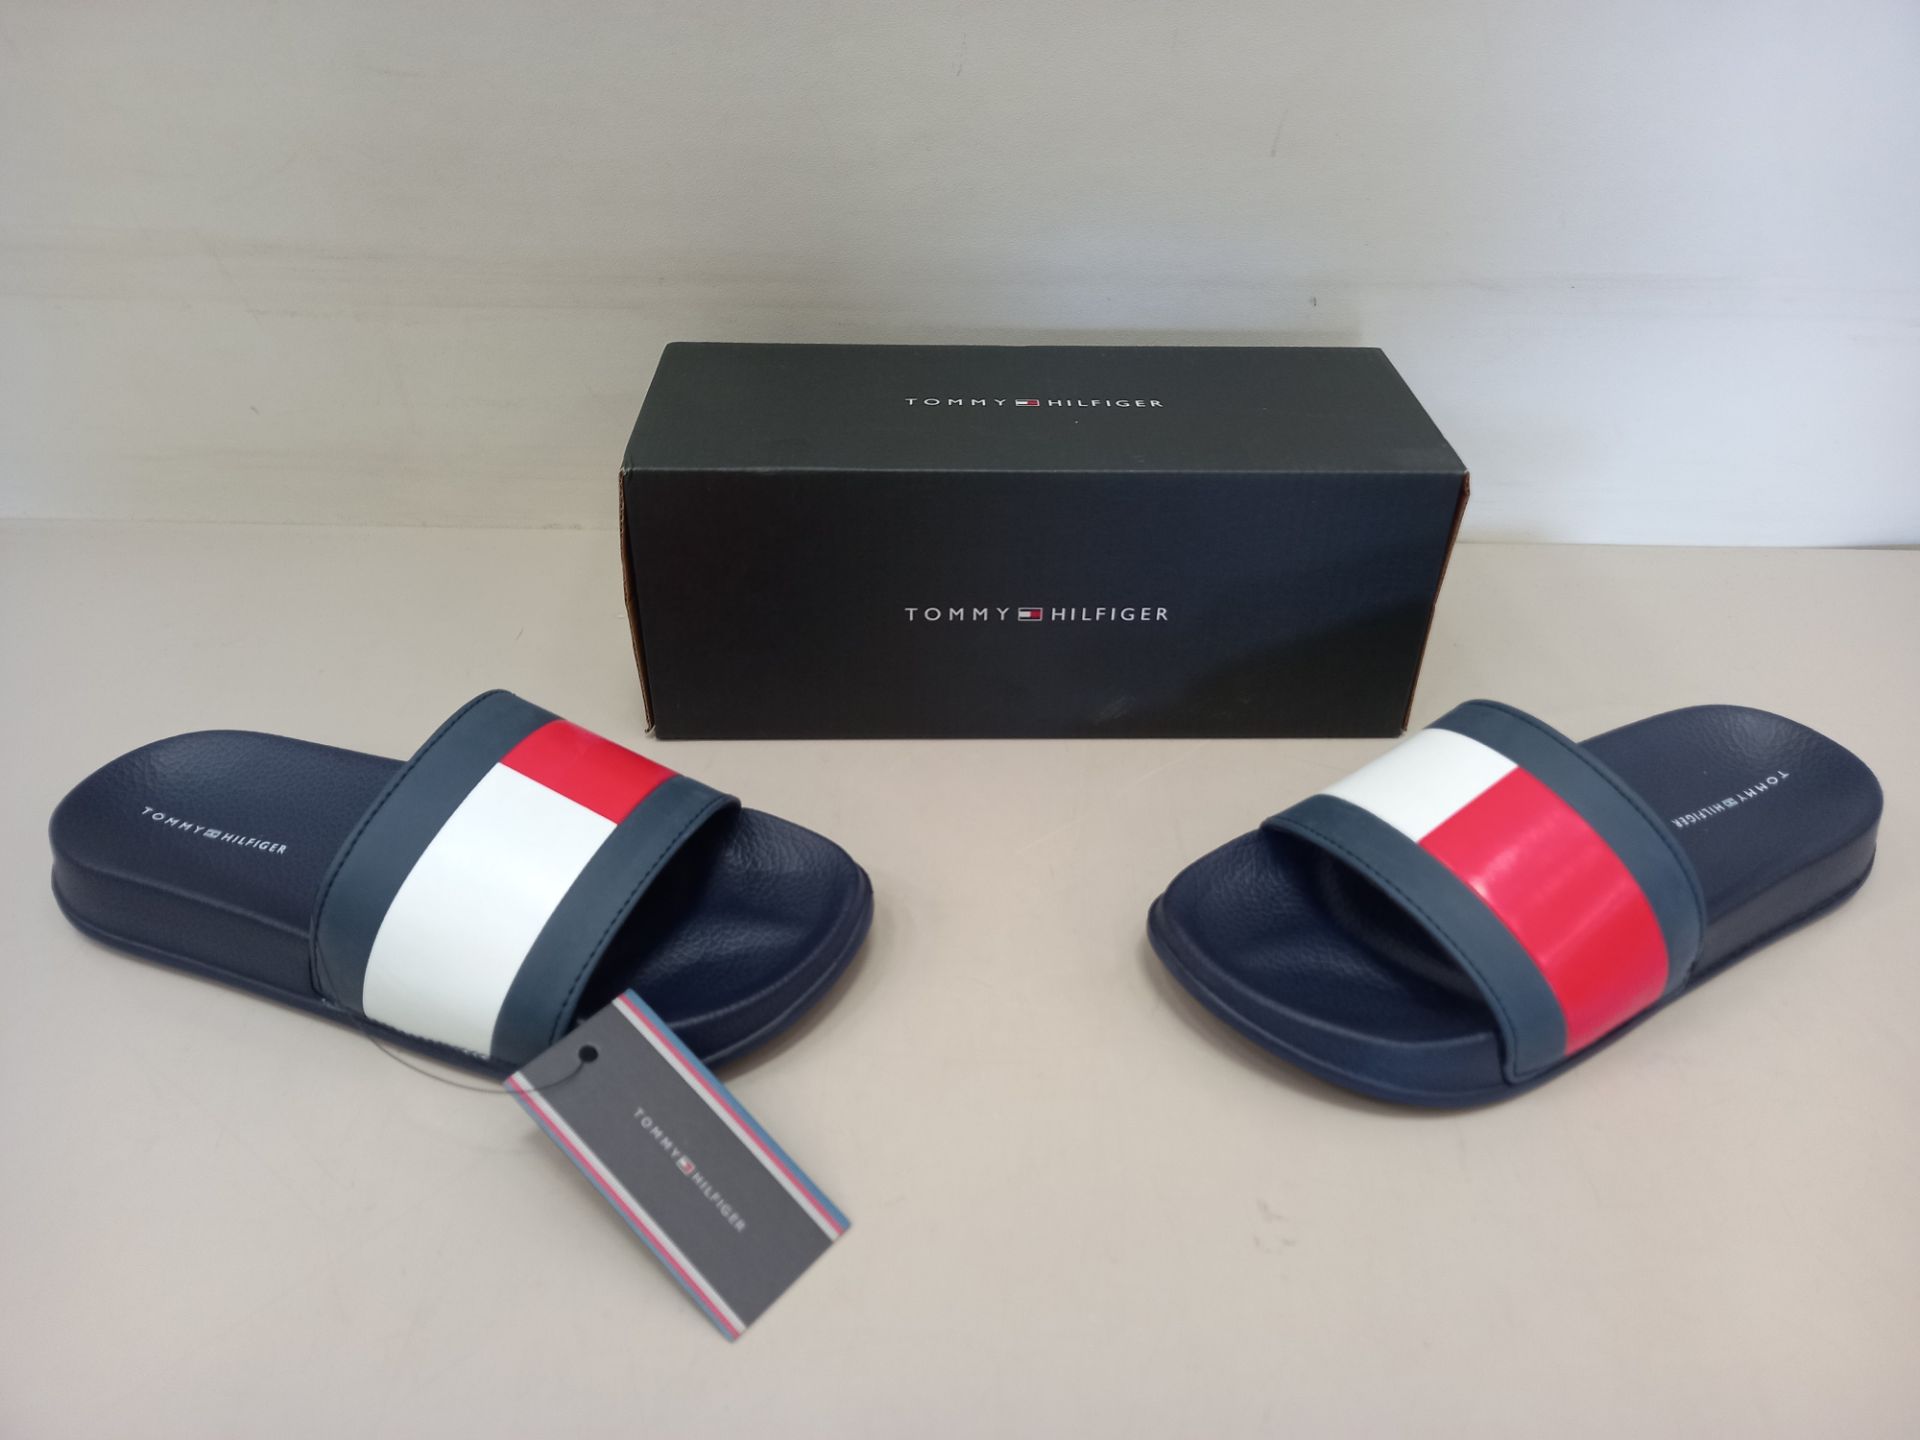 6 X BRAND NEW PAIRS OF GENUINE TOMMY HILFIGER NAVY/WHITE/RED POOL SLIDERS SIZE UK 3.5 (EUR 36) -